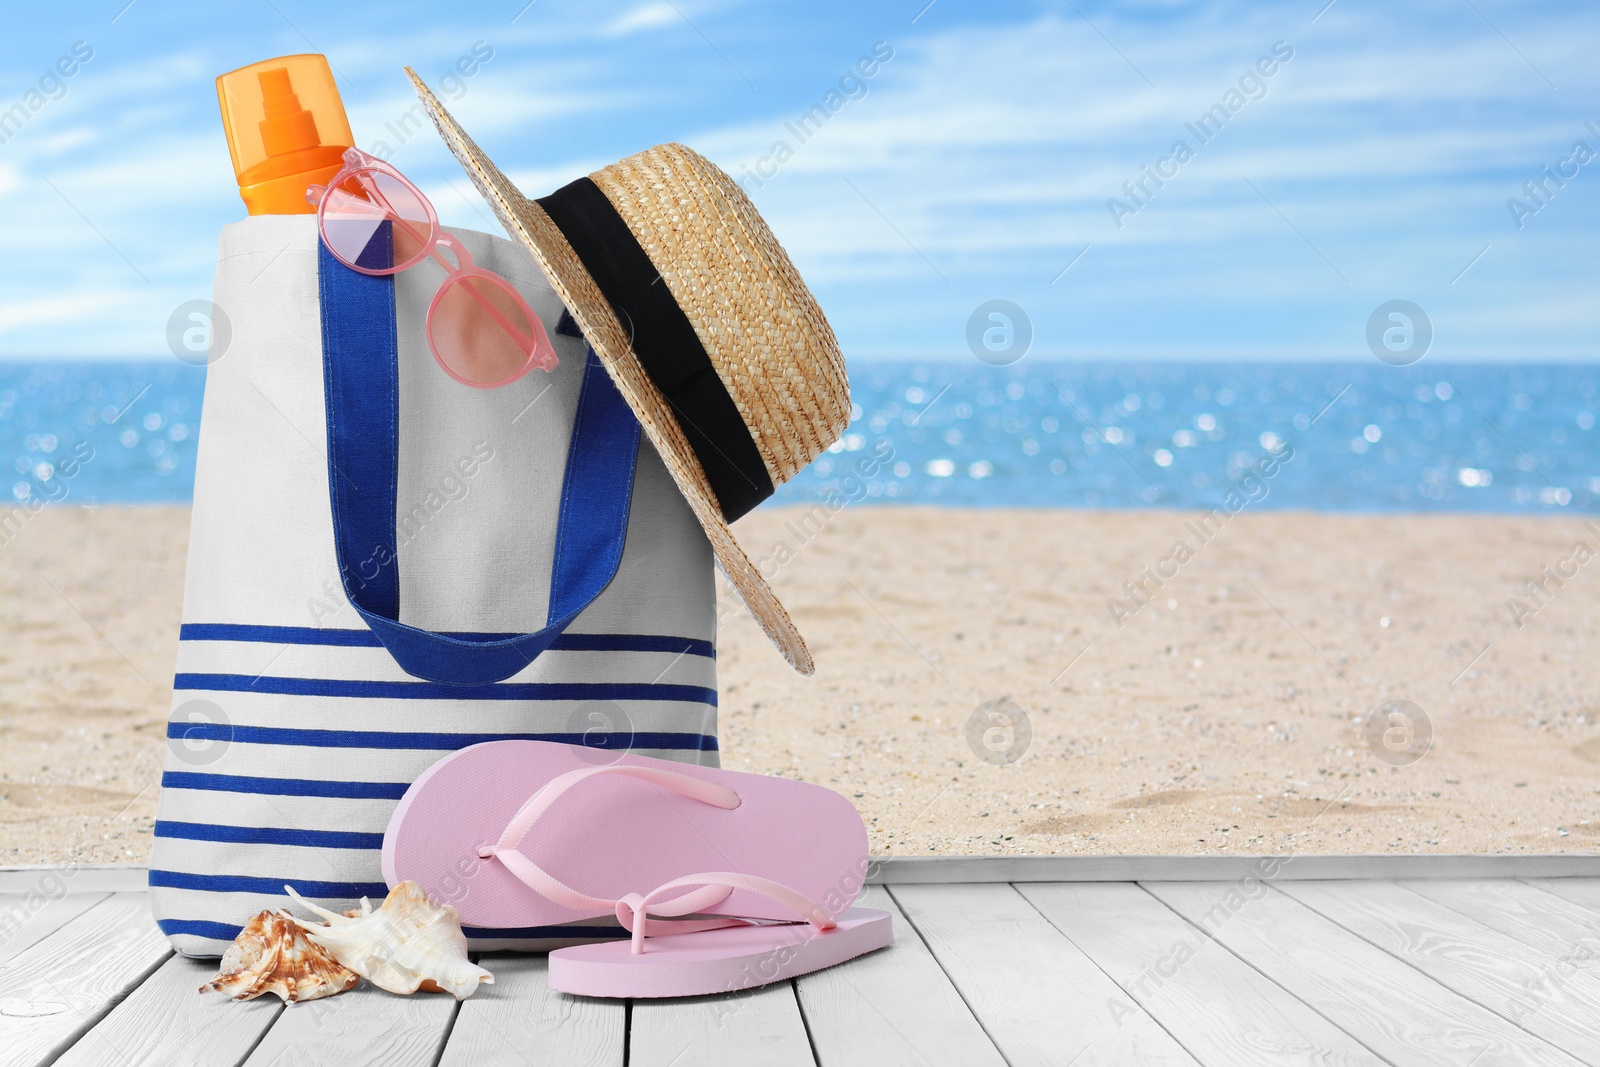 Image of Bag with sunscreen and accessories on sunny ocean beach, space for text. Summer vacation